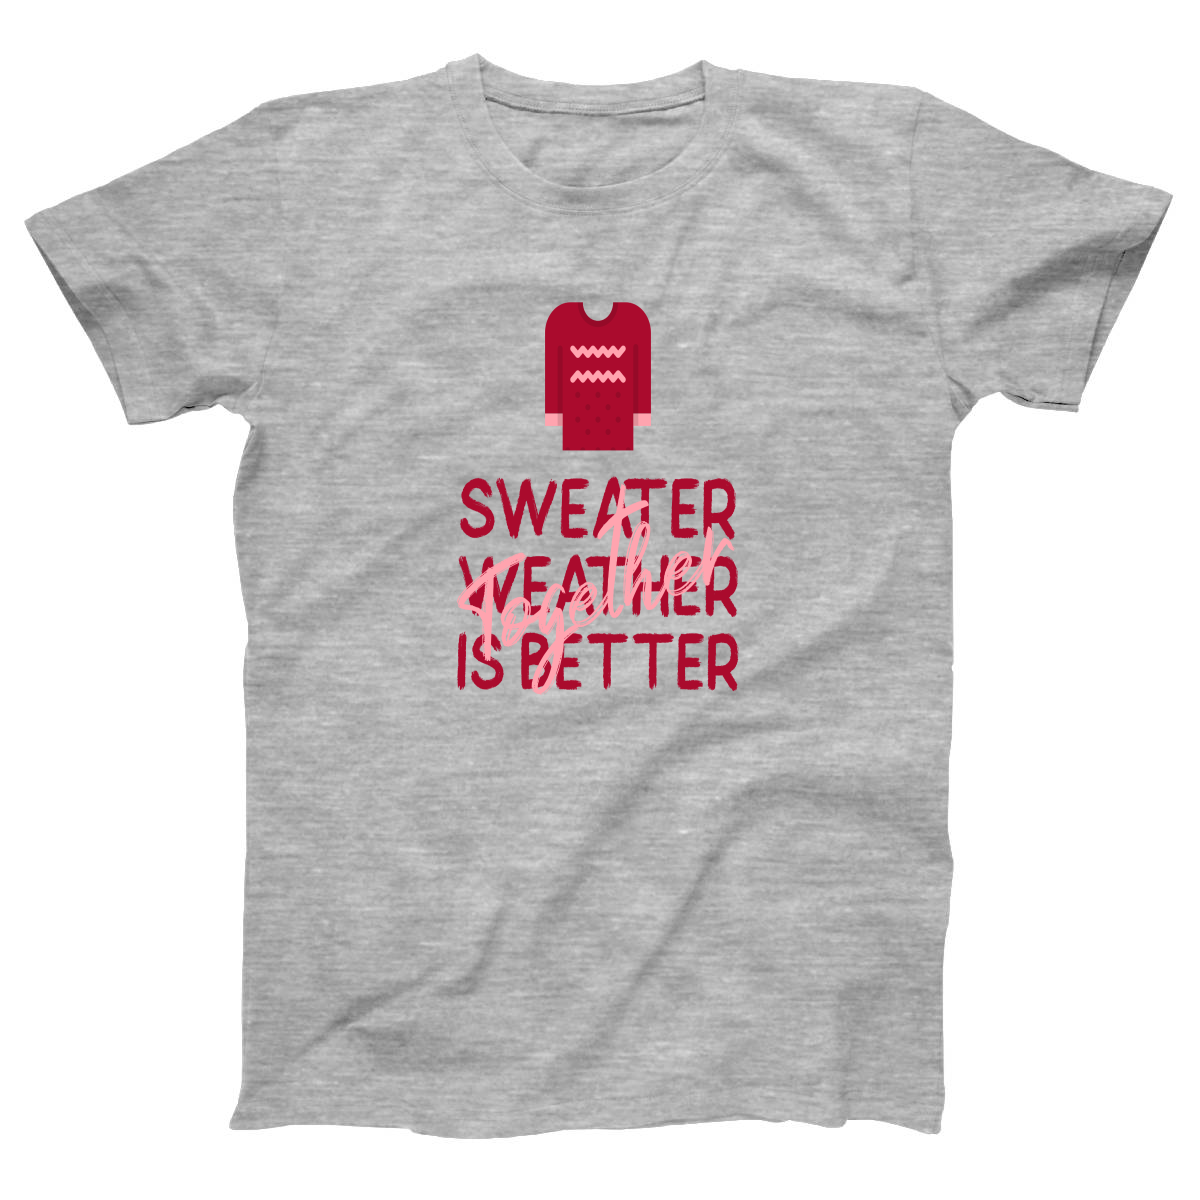 Sweather Weather is Better Together Women's T-shirt | Gray